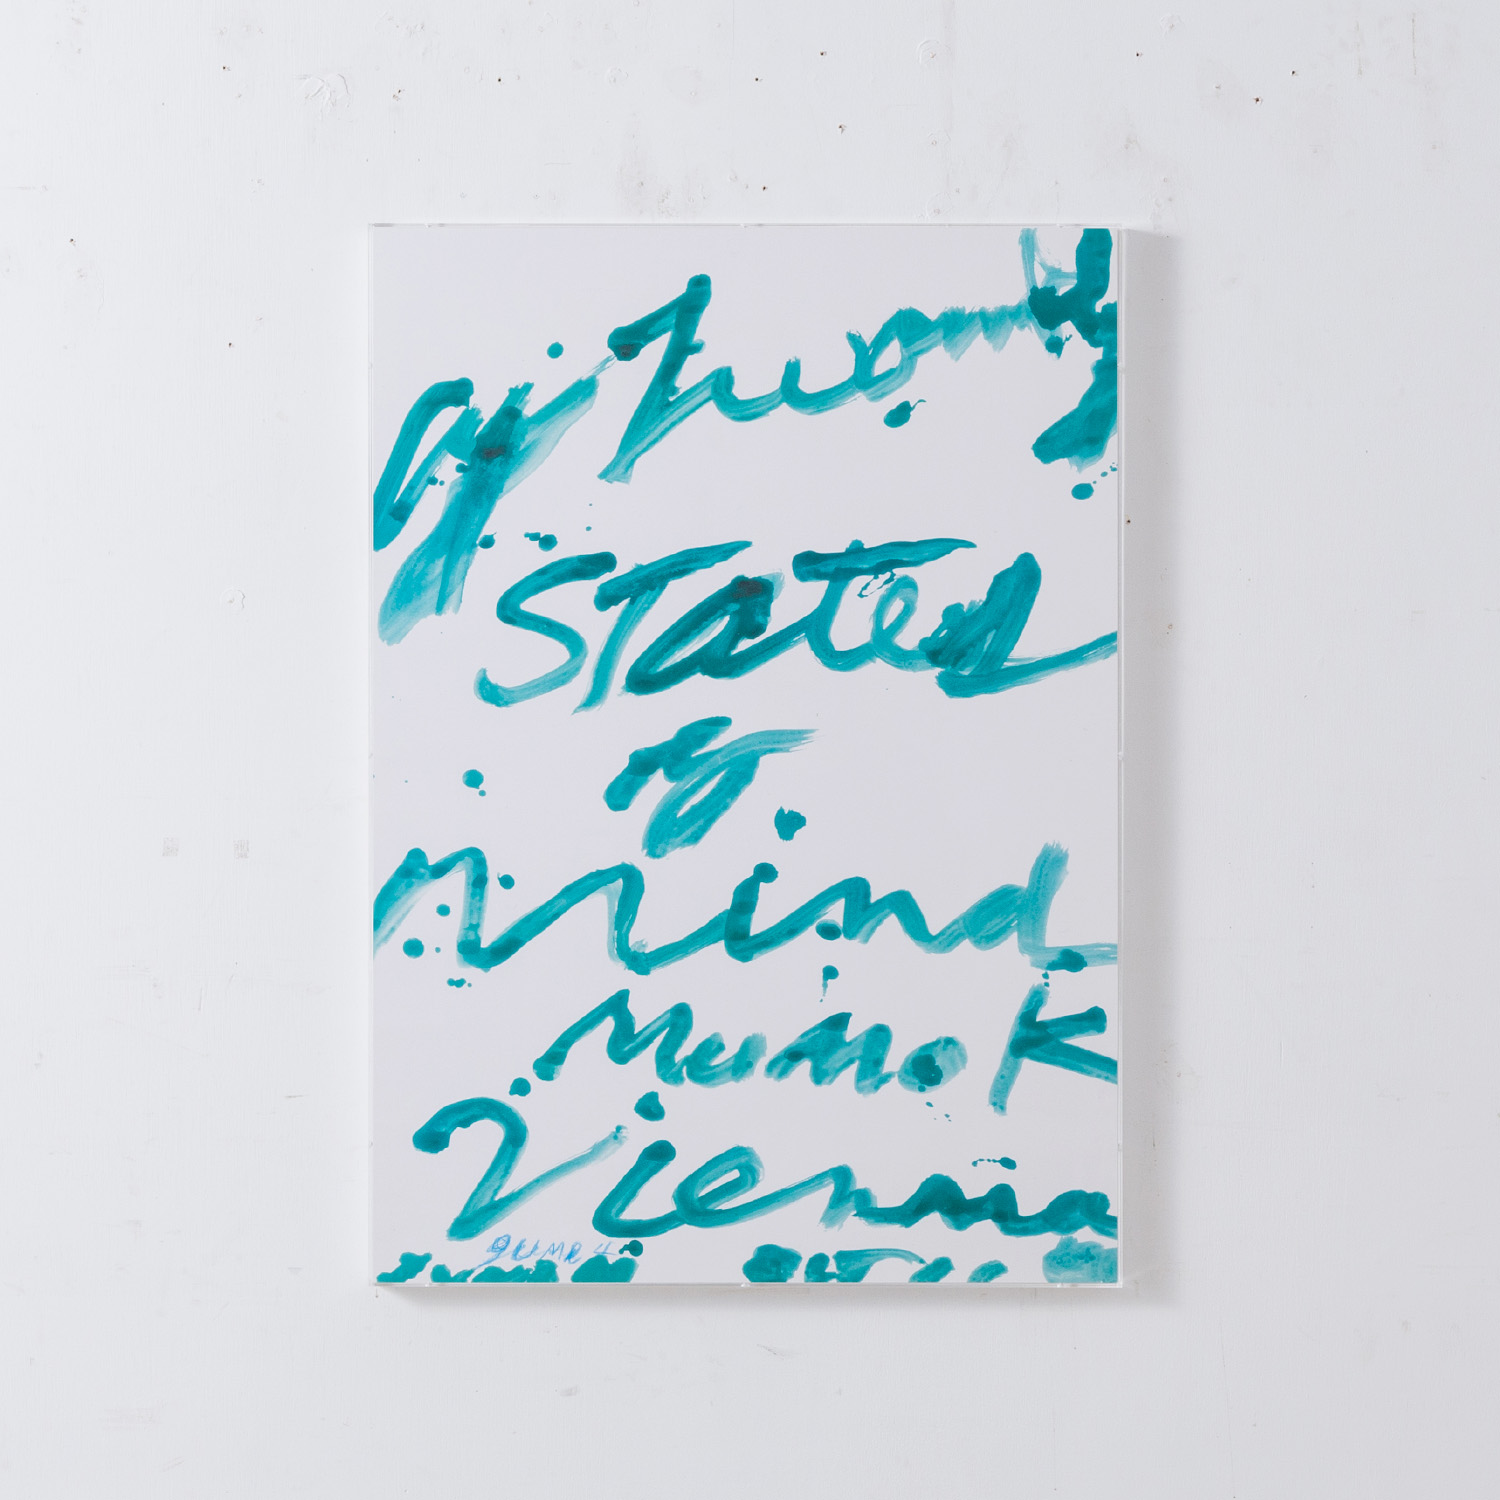 ‘States of Mind’ by Cy Twombly for Mumok , 2009